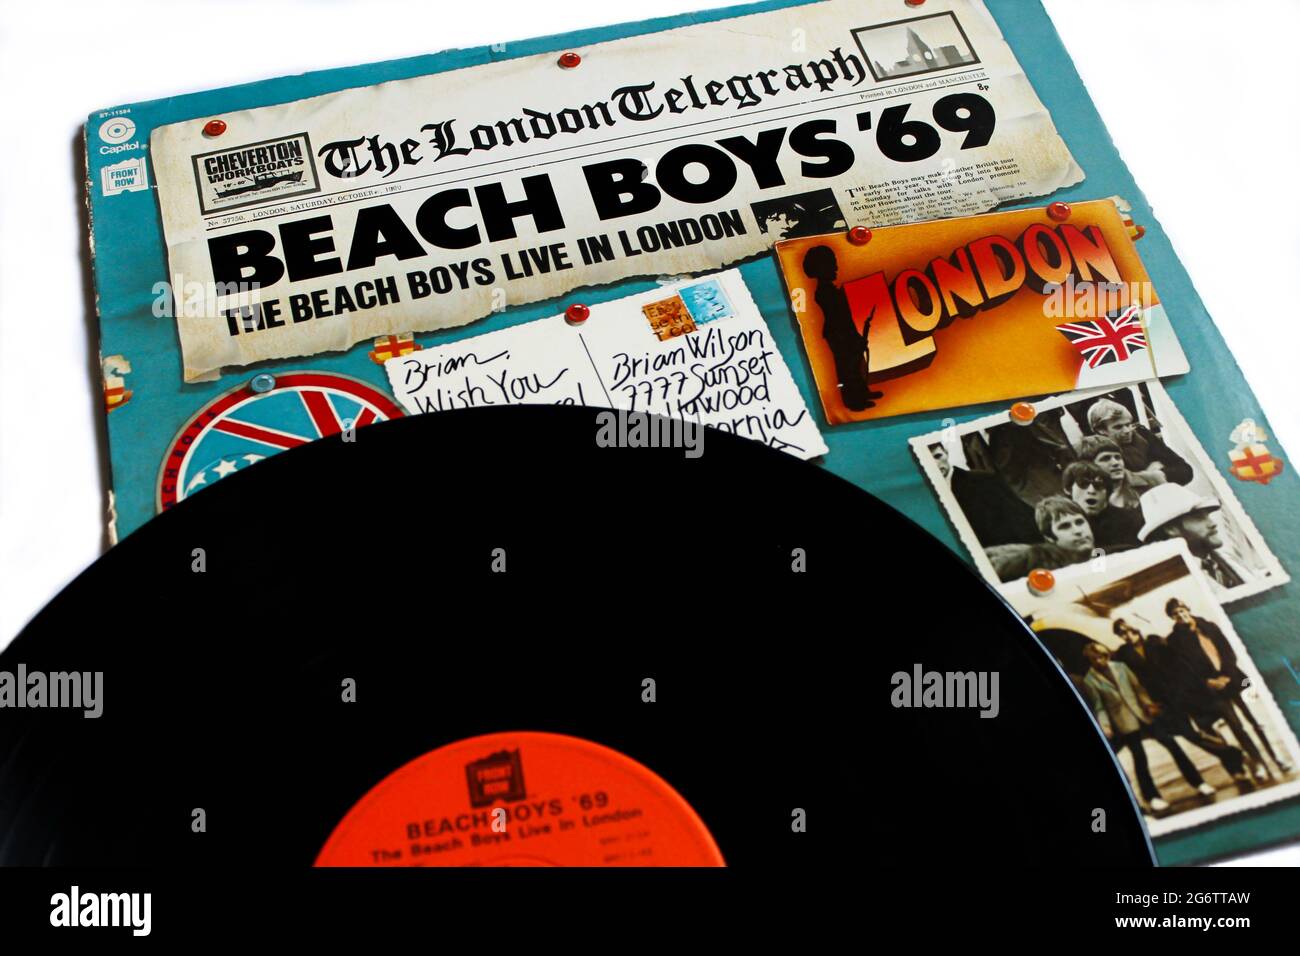 Classic rock band, The Beach Boys music album on vinyl record LP disc. Titled Live In London 1969 album cover Stock Photo